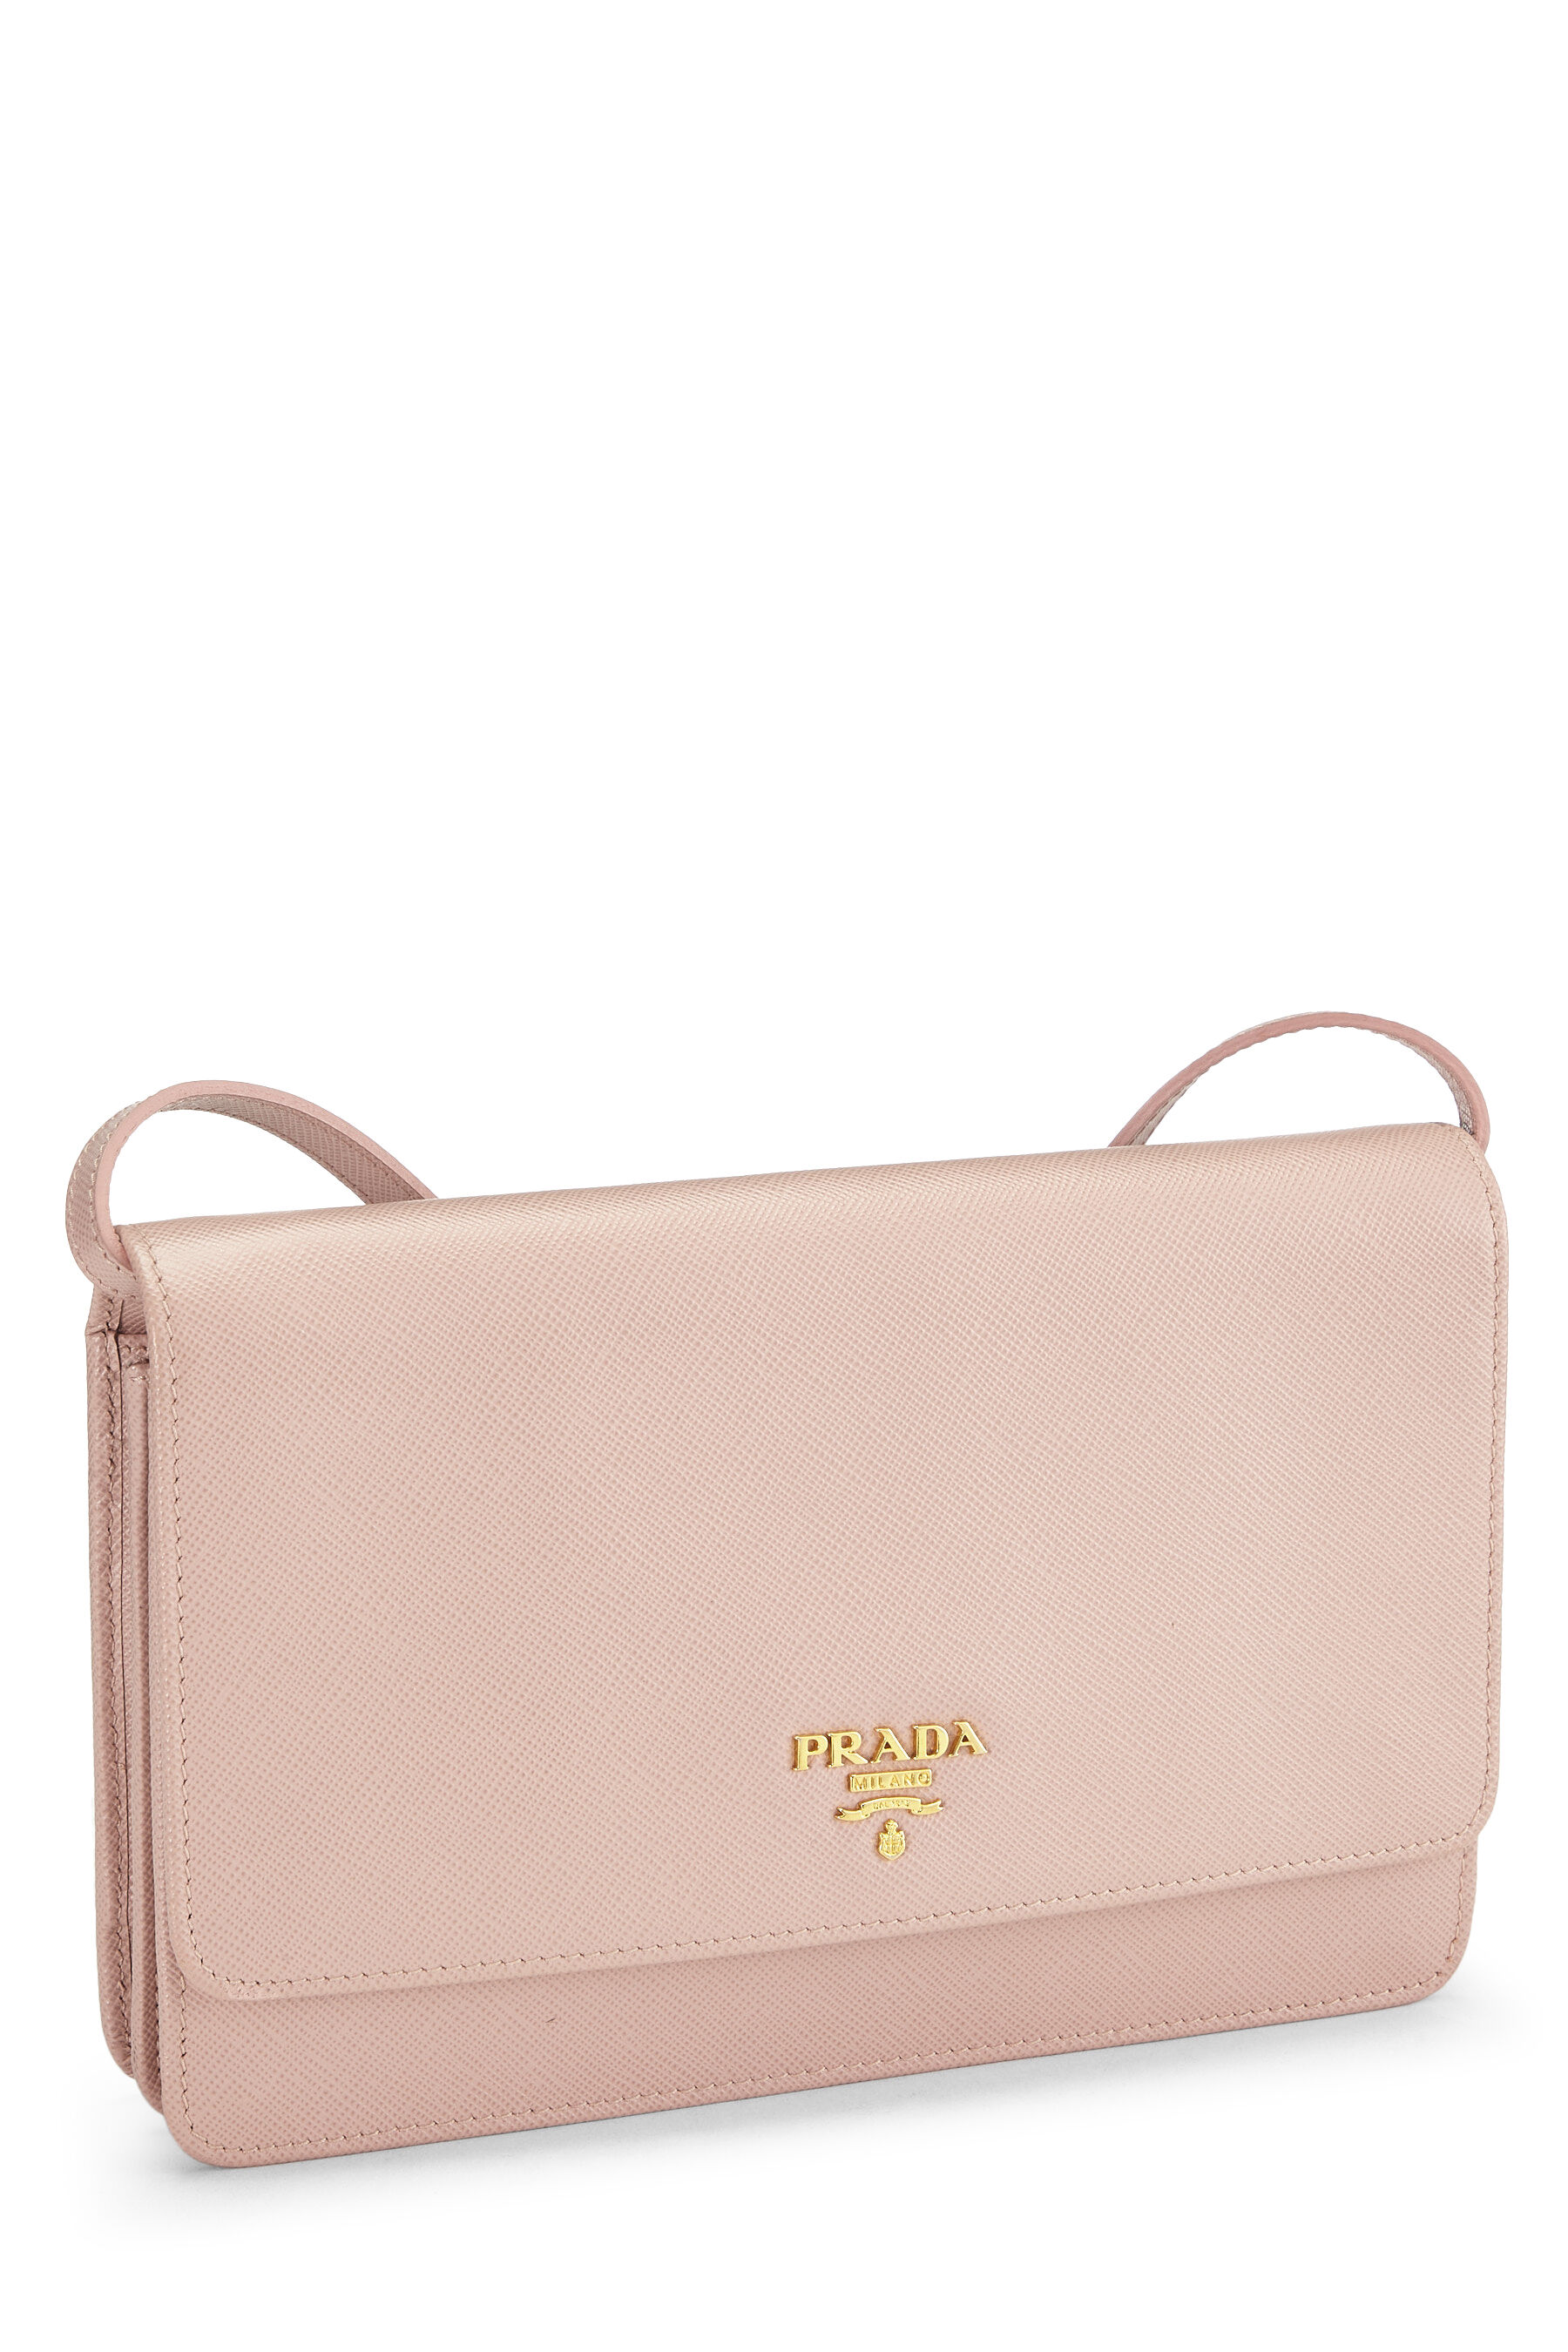 Prada - Pink Saffiano Leather Wallet-On-Chain (WOC)